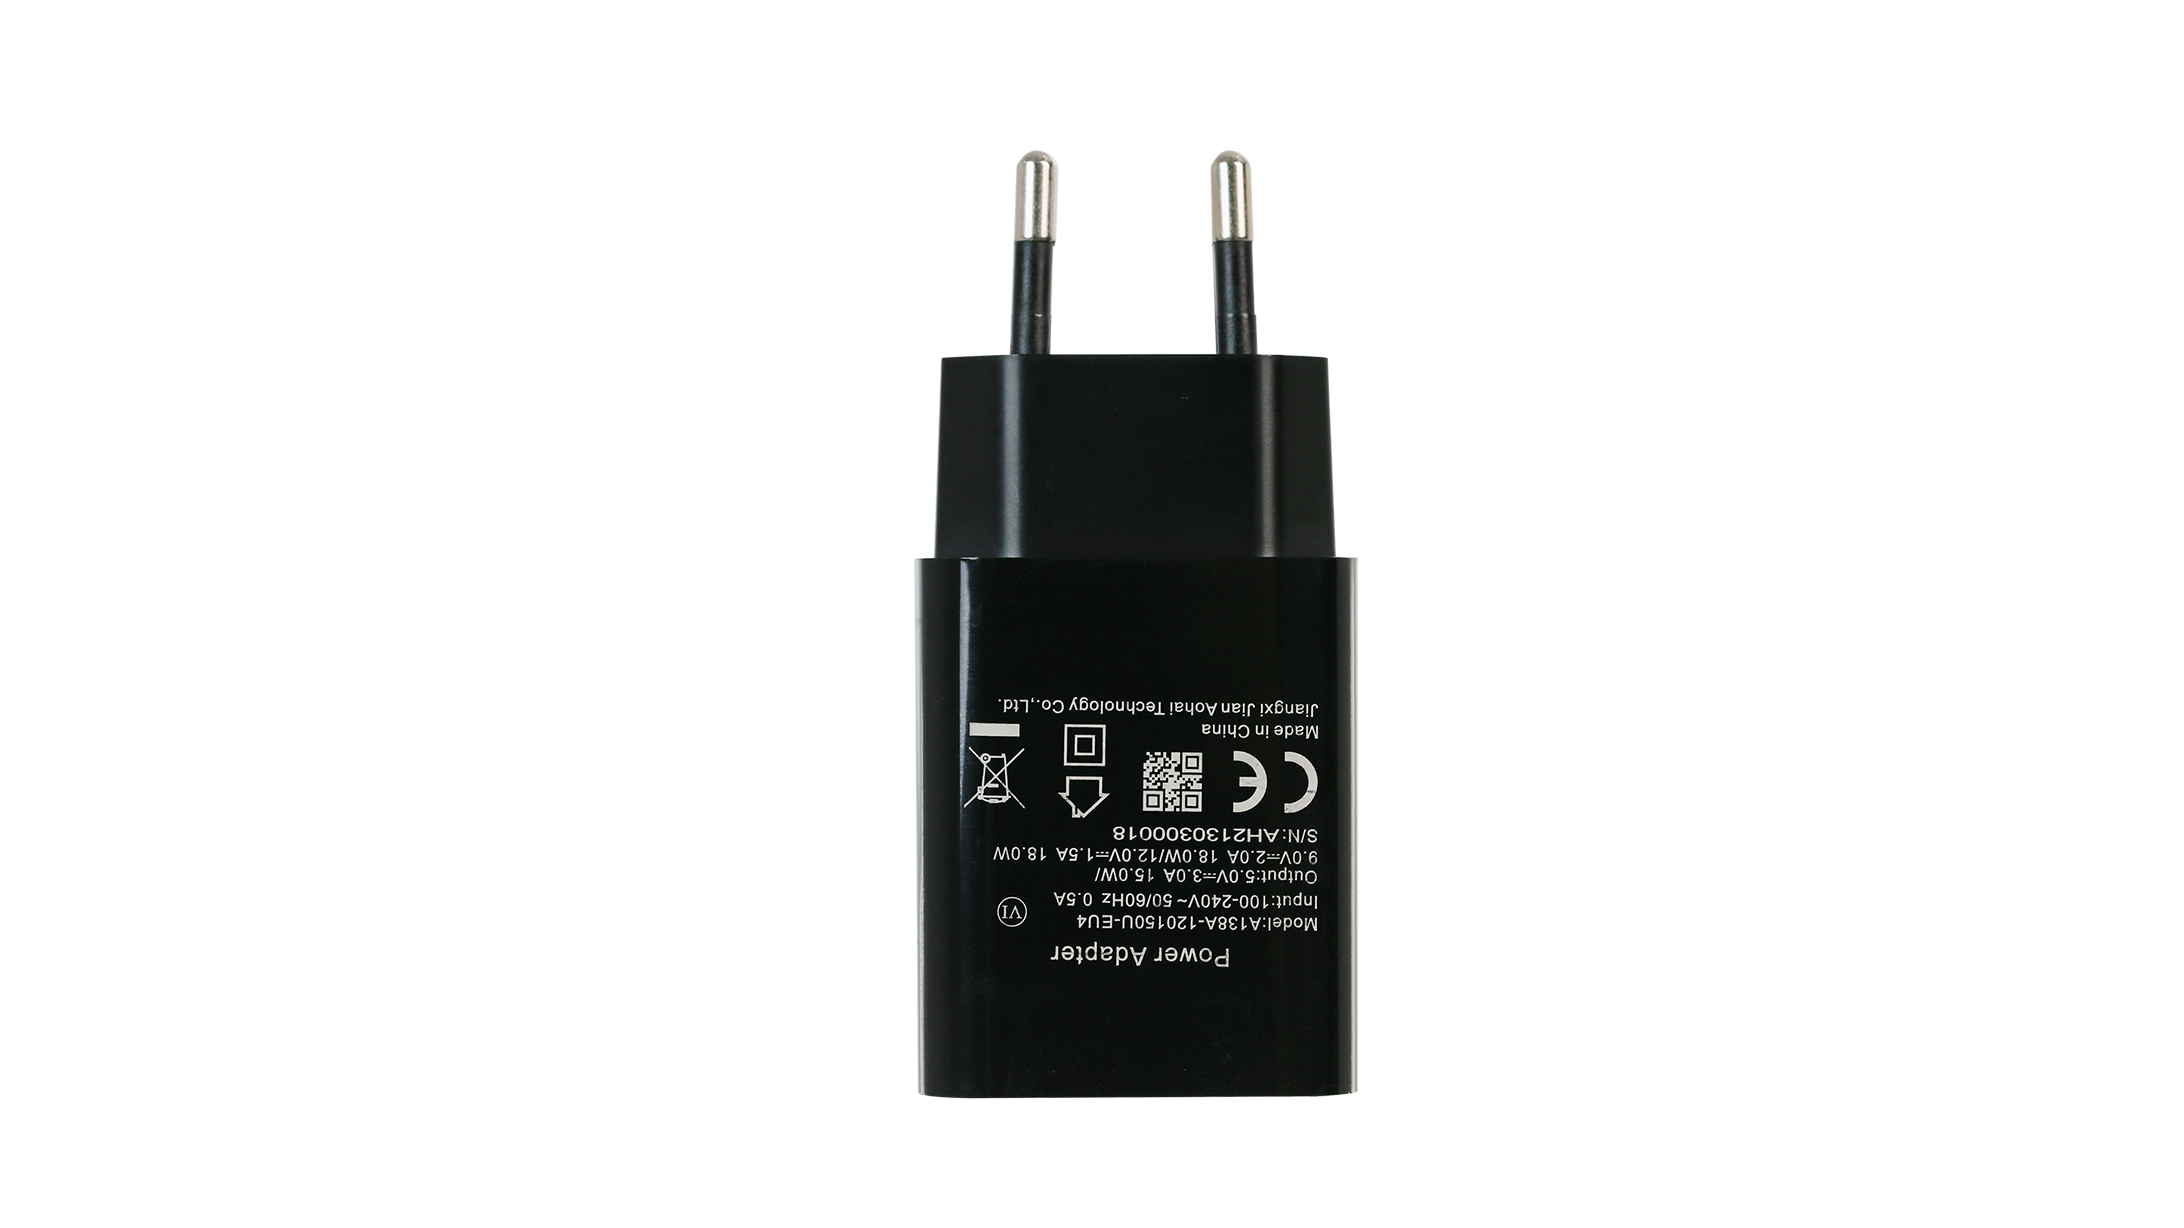 PS3006 Power Adapter